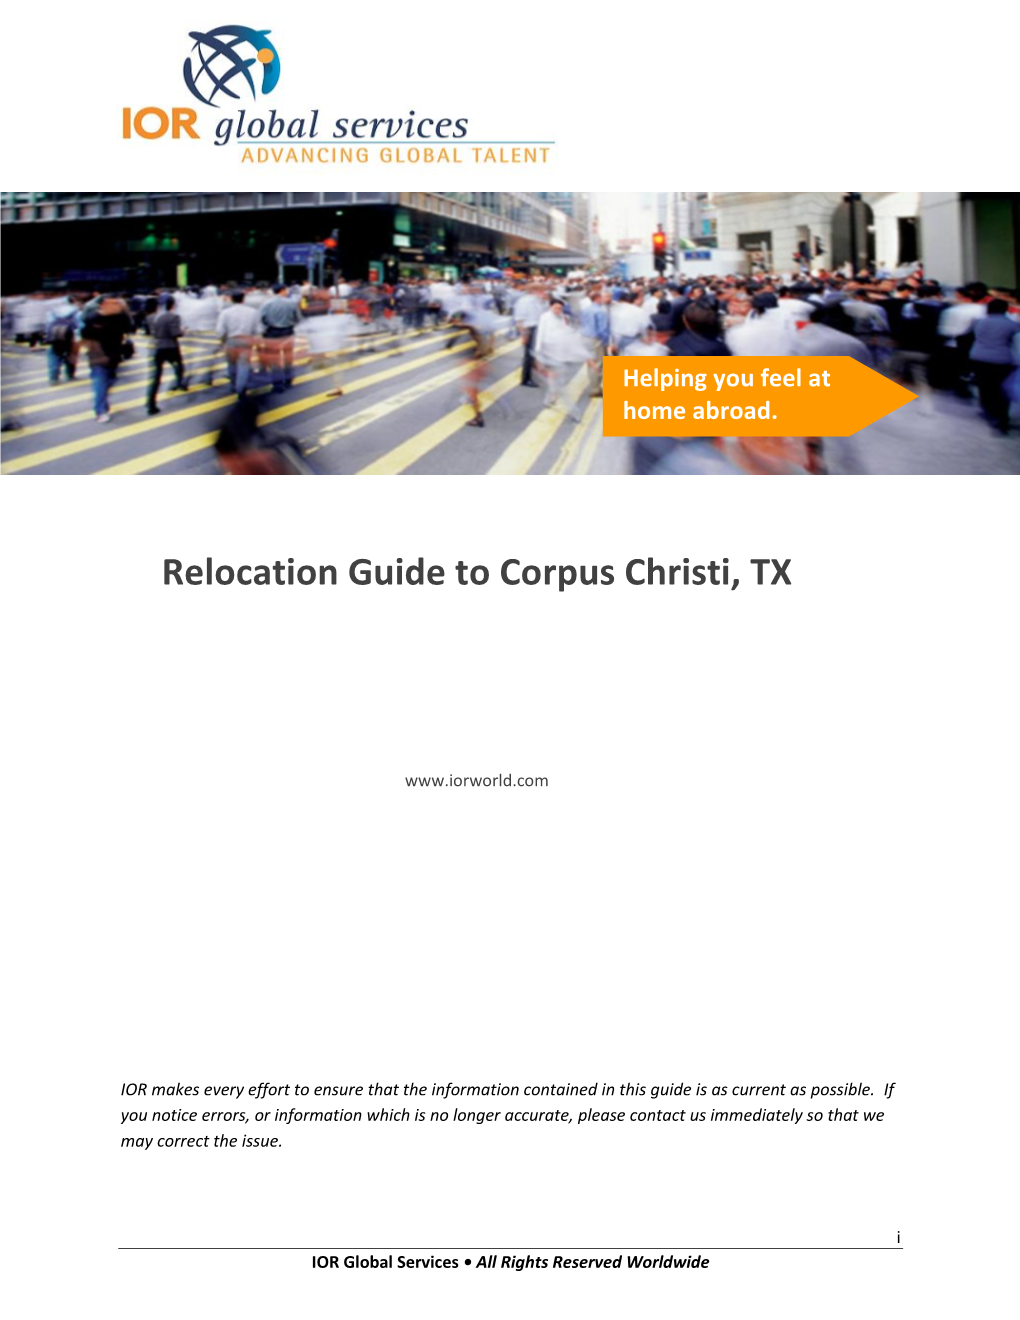 Relocation Guide to Corpus Christi, TX